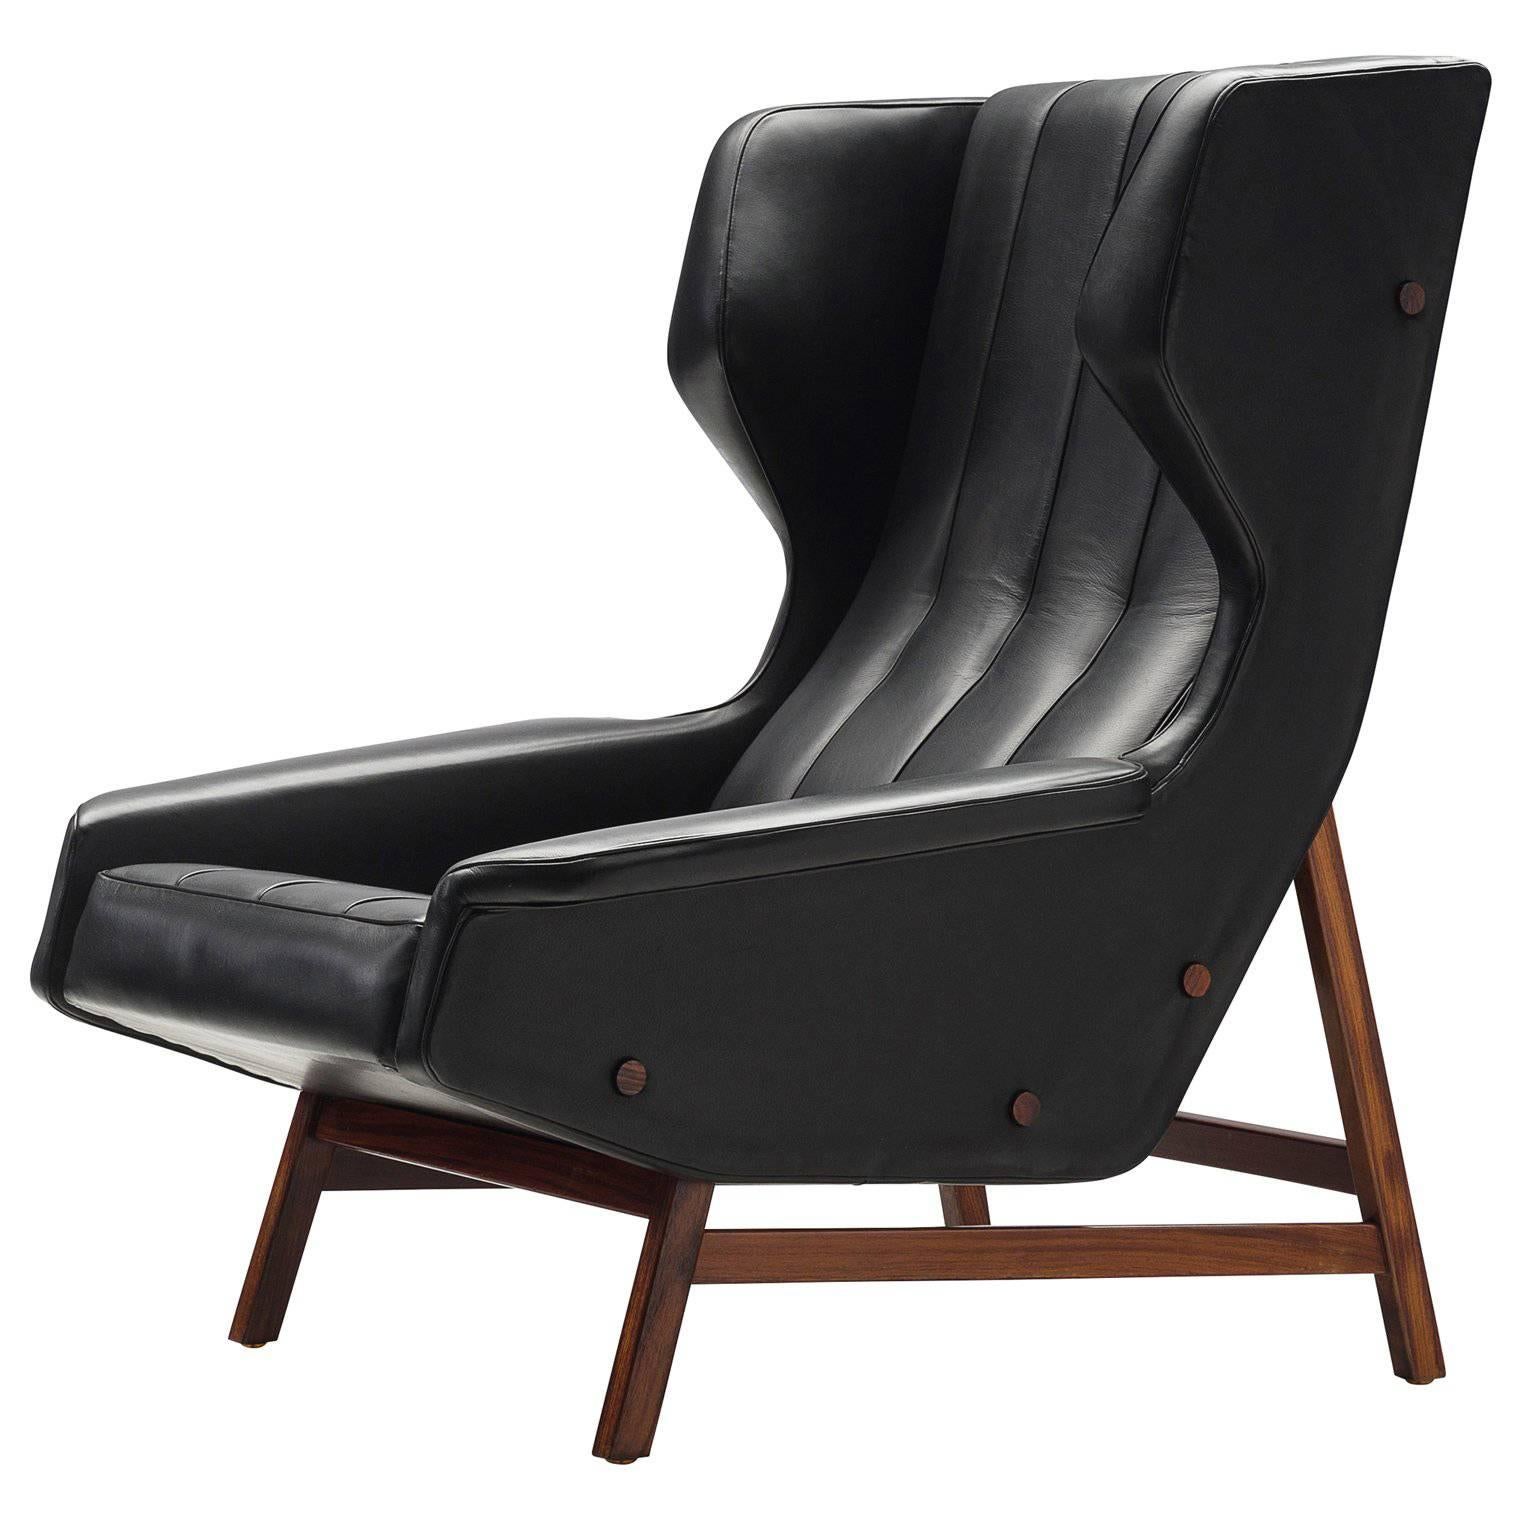 Gianfranco Frattini Chair Reupholstered with Aniline Leather Rosewood